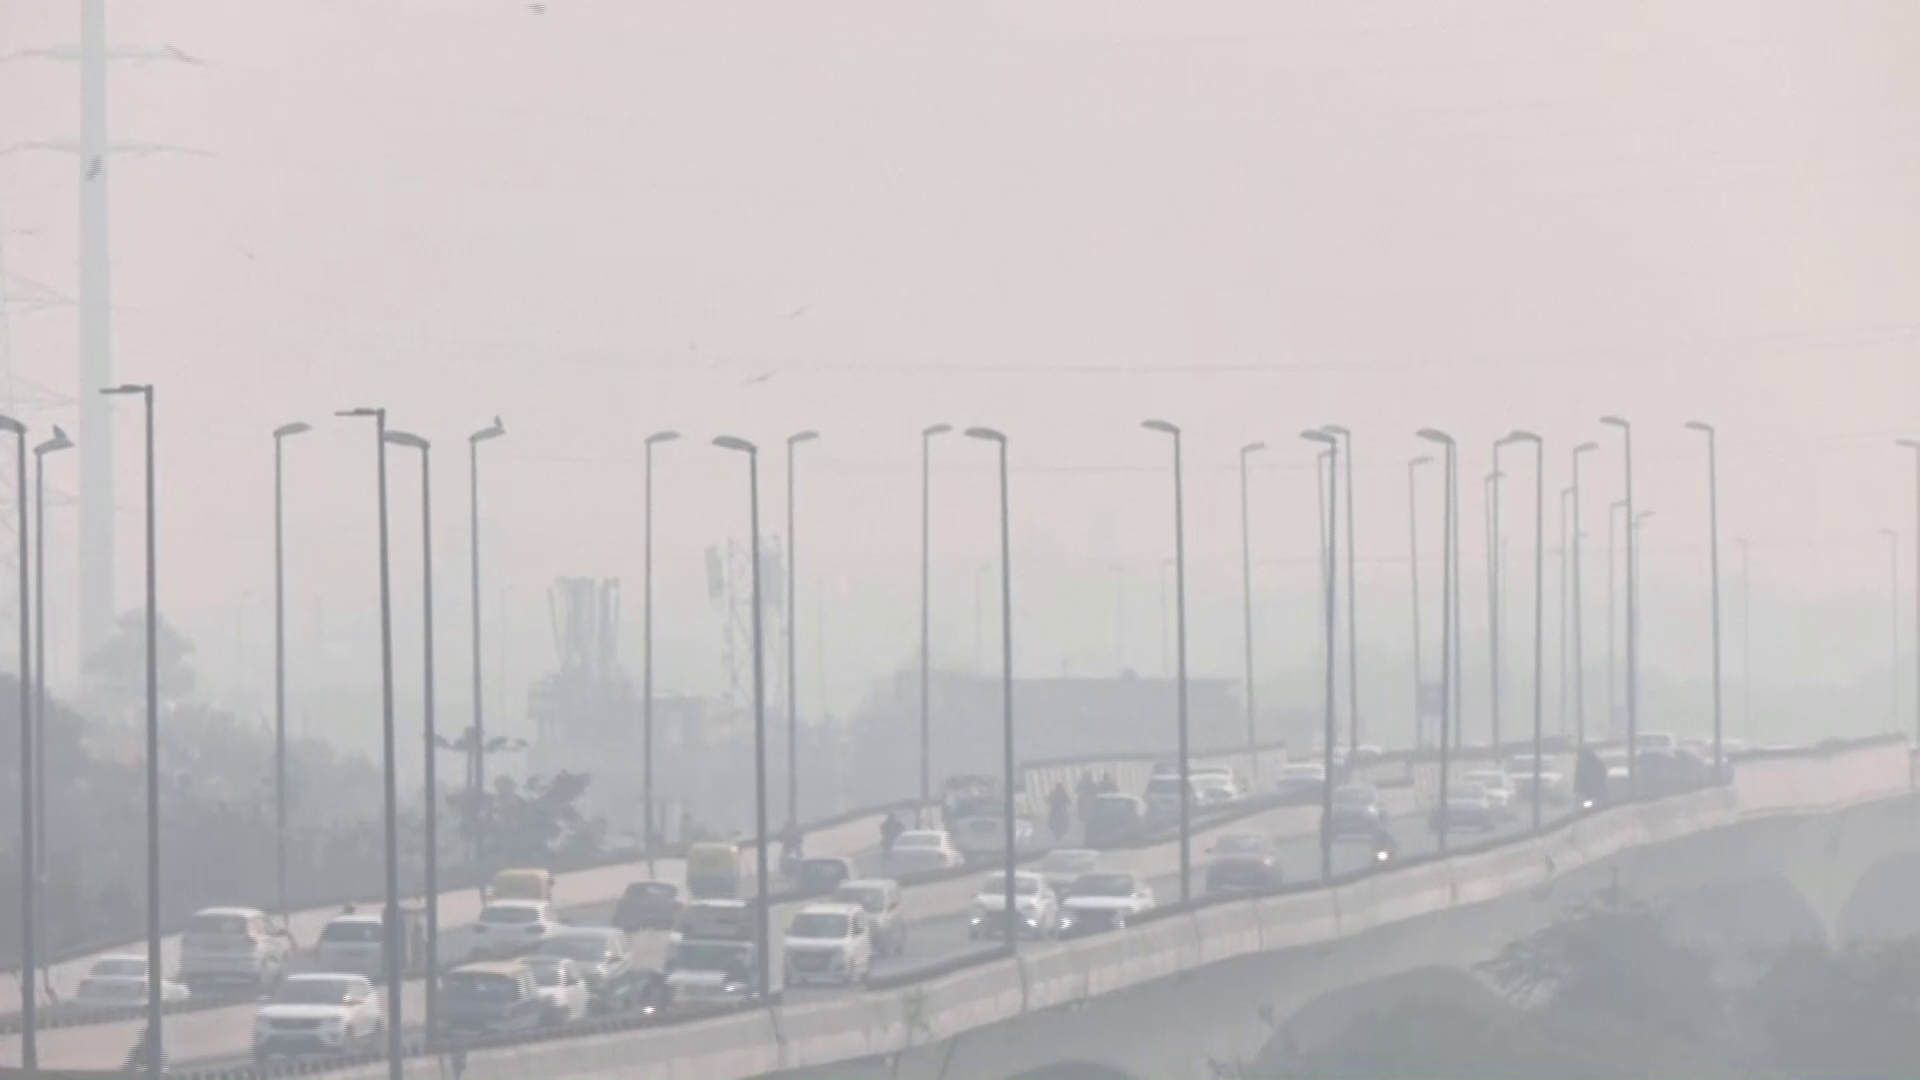 New Delhi residents struggle with worsening pollution